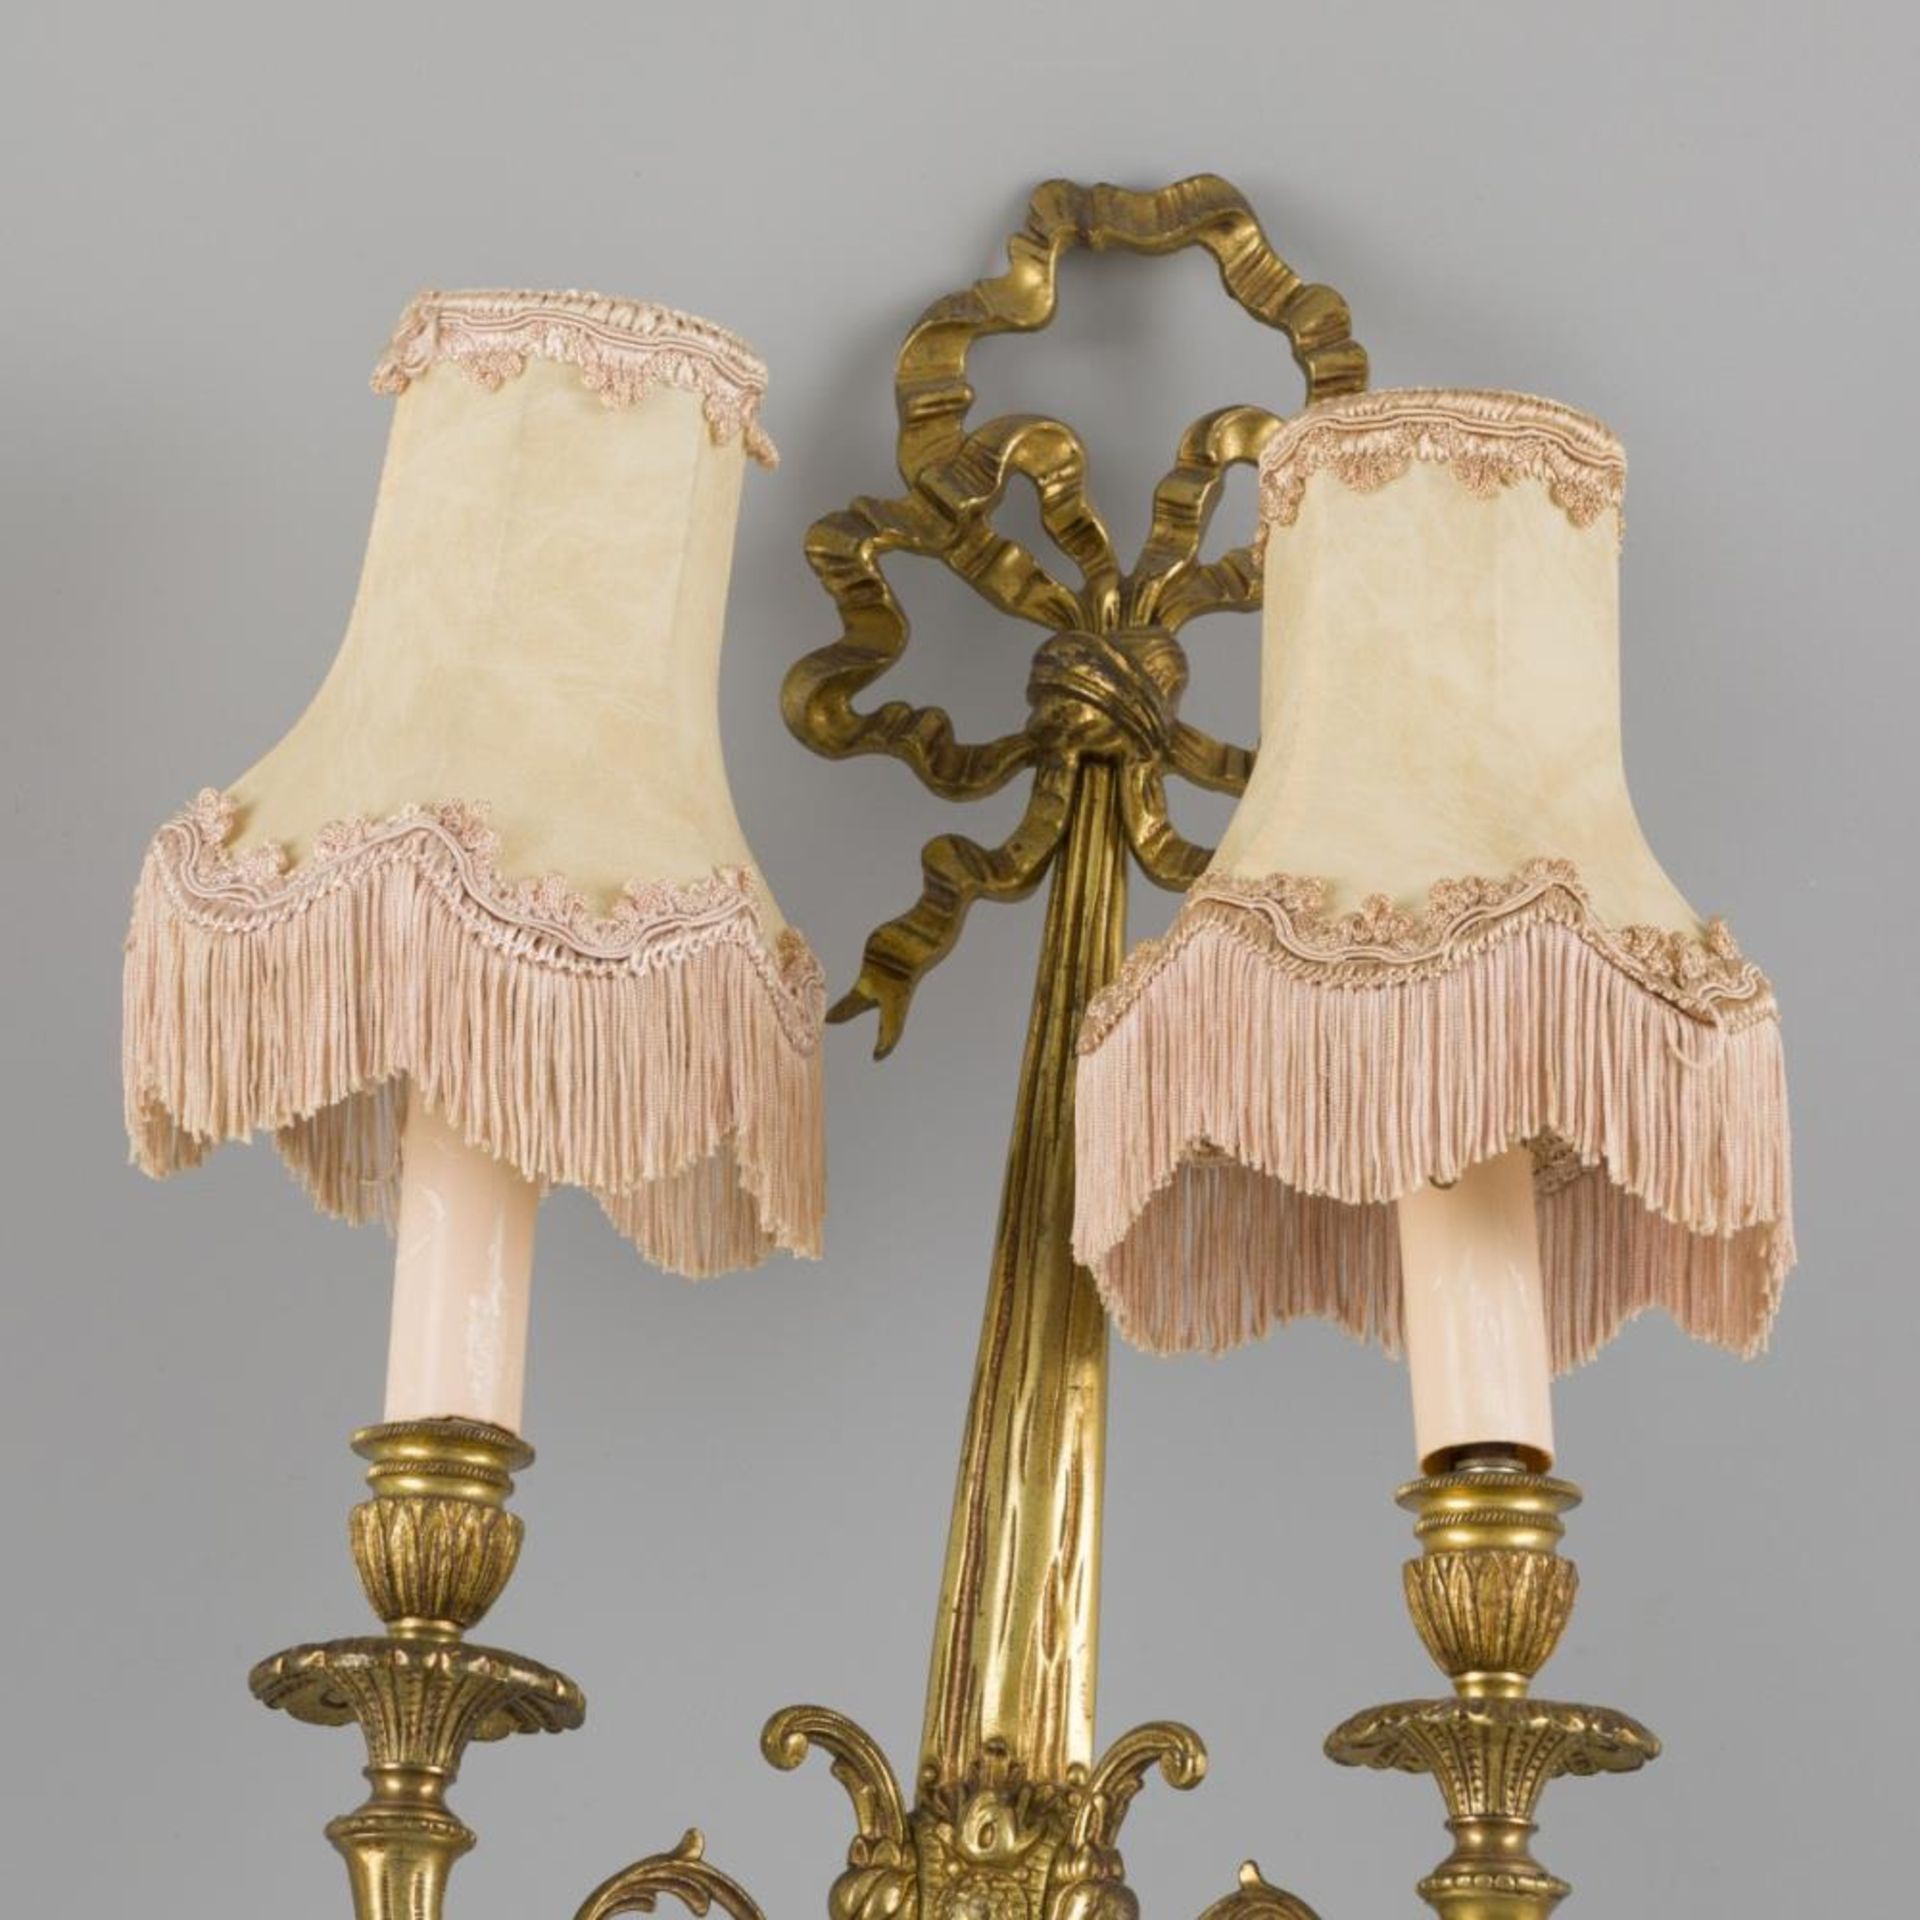 A two-light wall lamp / sconce in Louis XVI-style, brass, France, 20th century. - Bild 2 aus 2